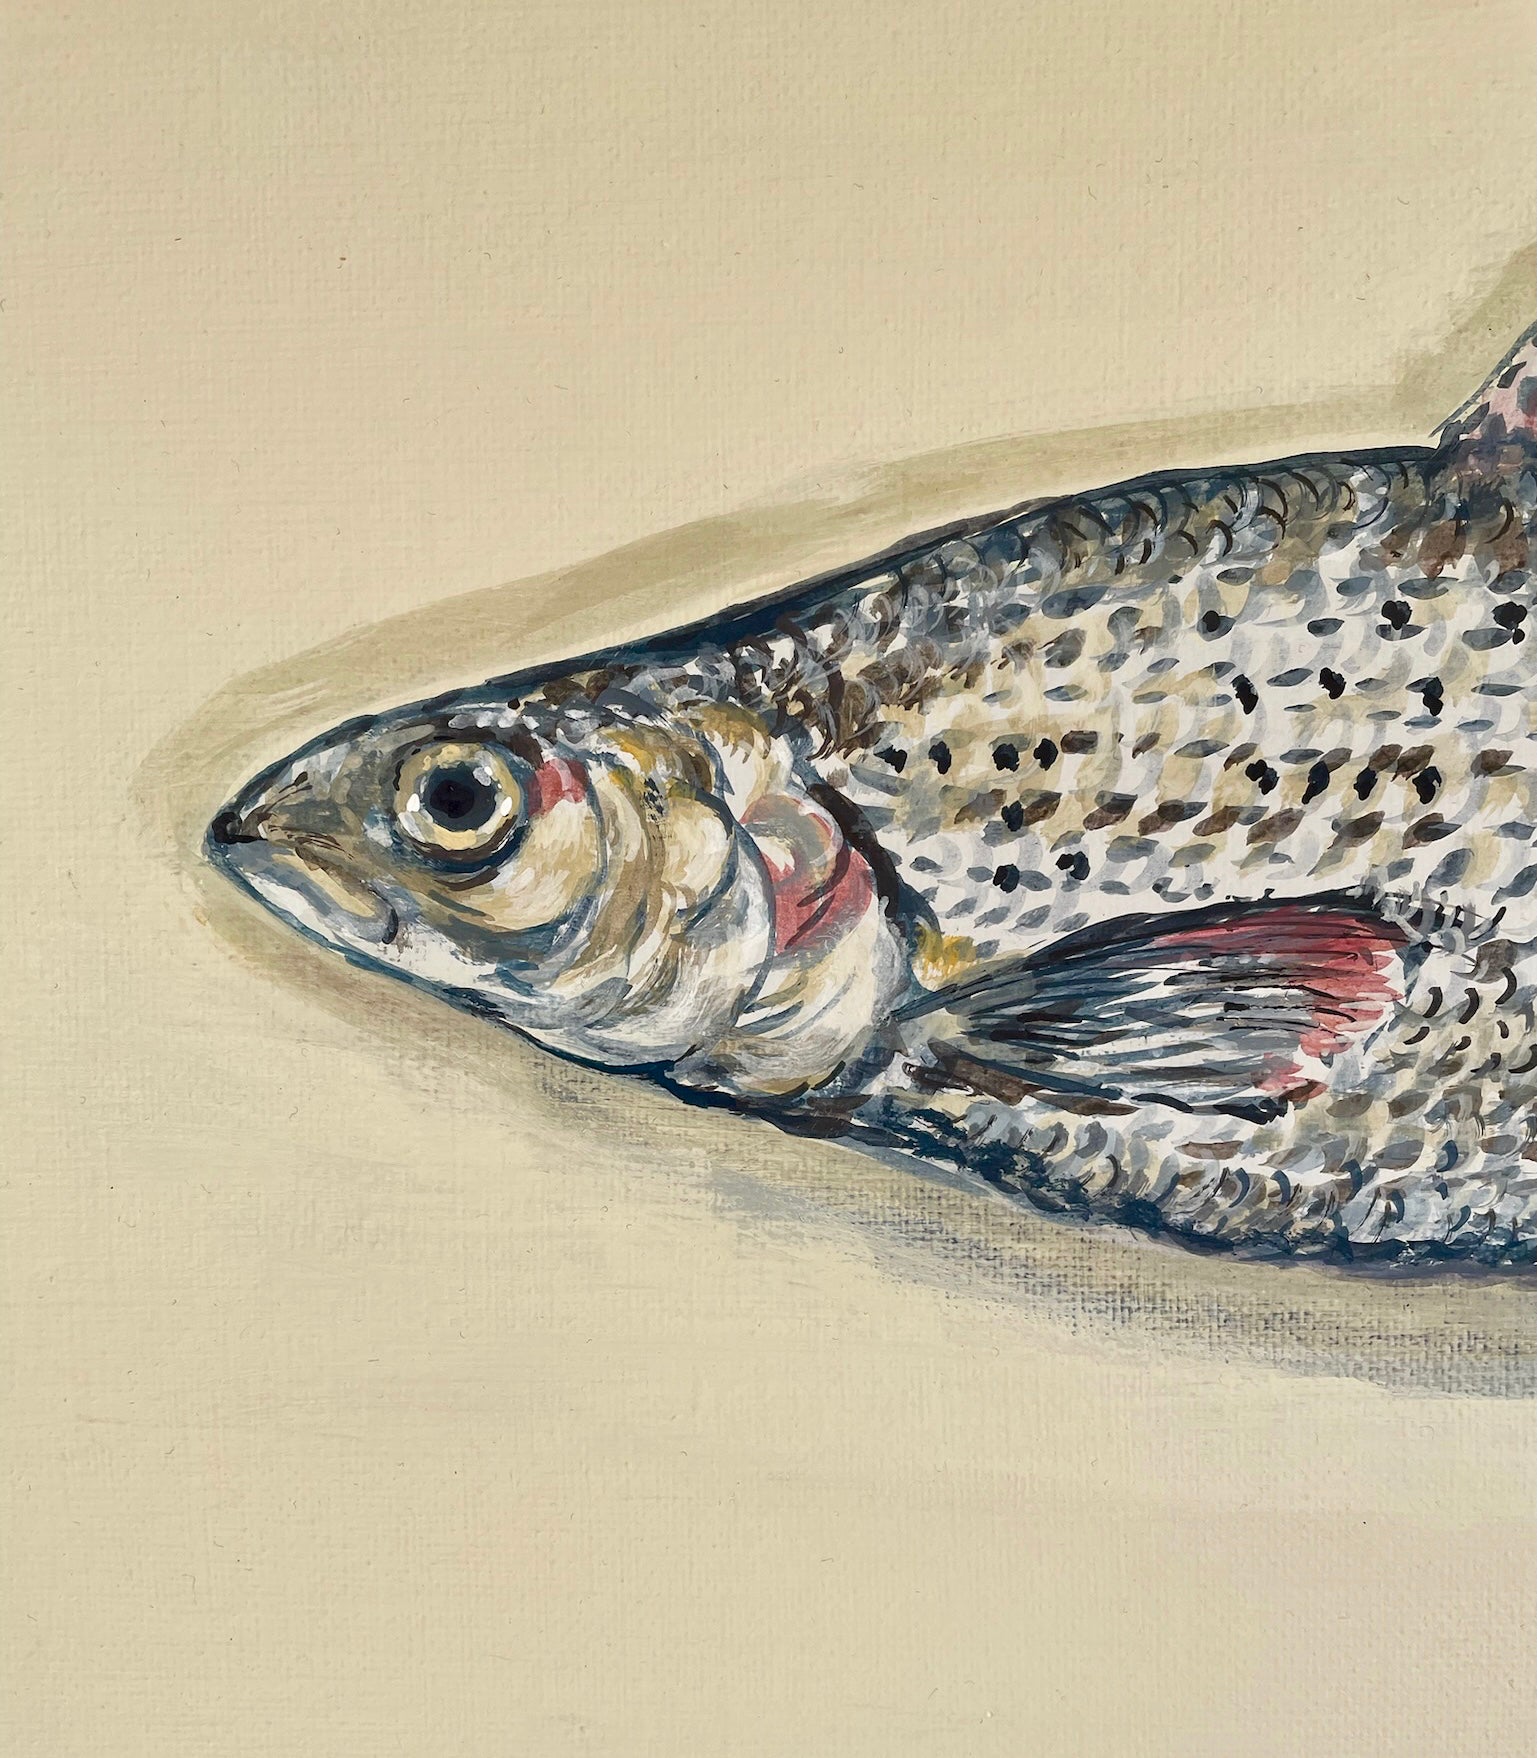 Grayling.  This painting is reminiscent of the traditional taxidermy fish displayed in a glass fronted case, often seen in country houses and fieldsports lodges.